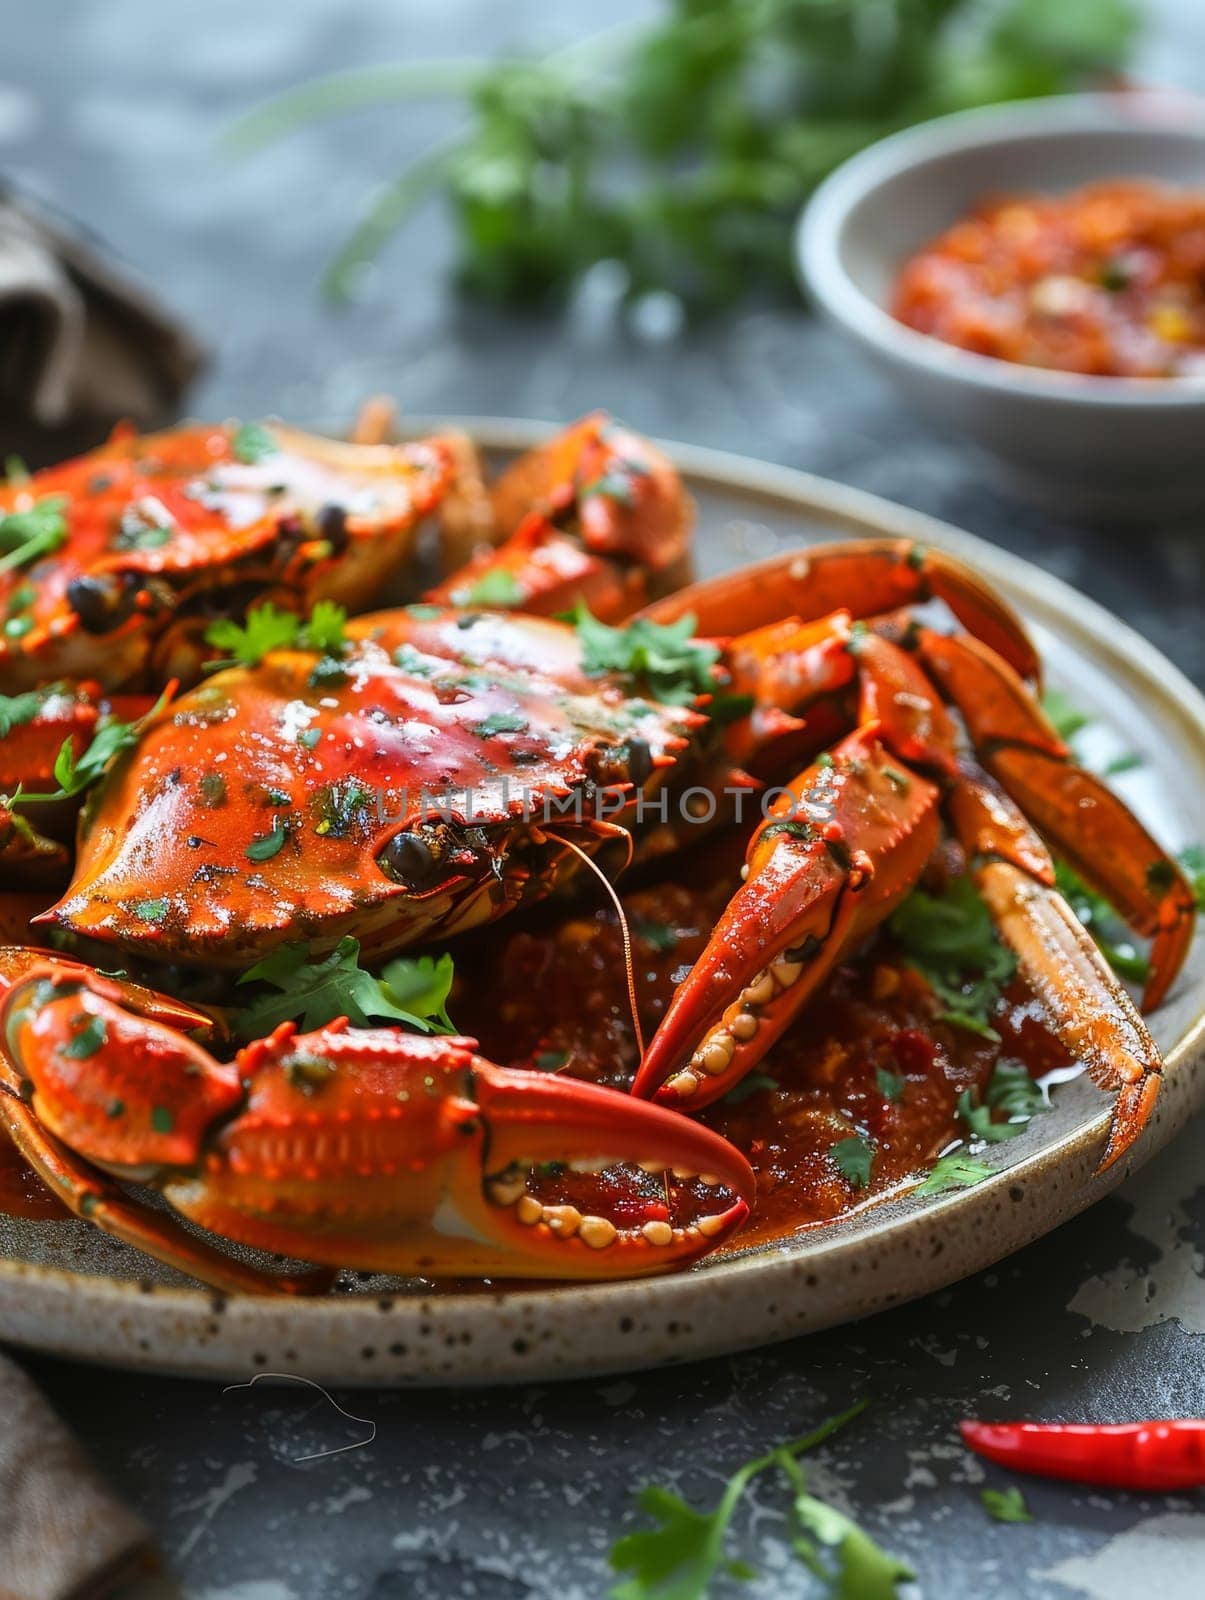 Singaporean chili crab, a beloved regional delicacy, served piping hot on a plate with a vibrant tomato-chili dipping sauce and fresh herbs. The bold tastes of Singaporean cuisine